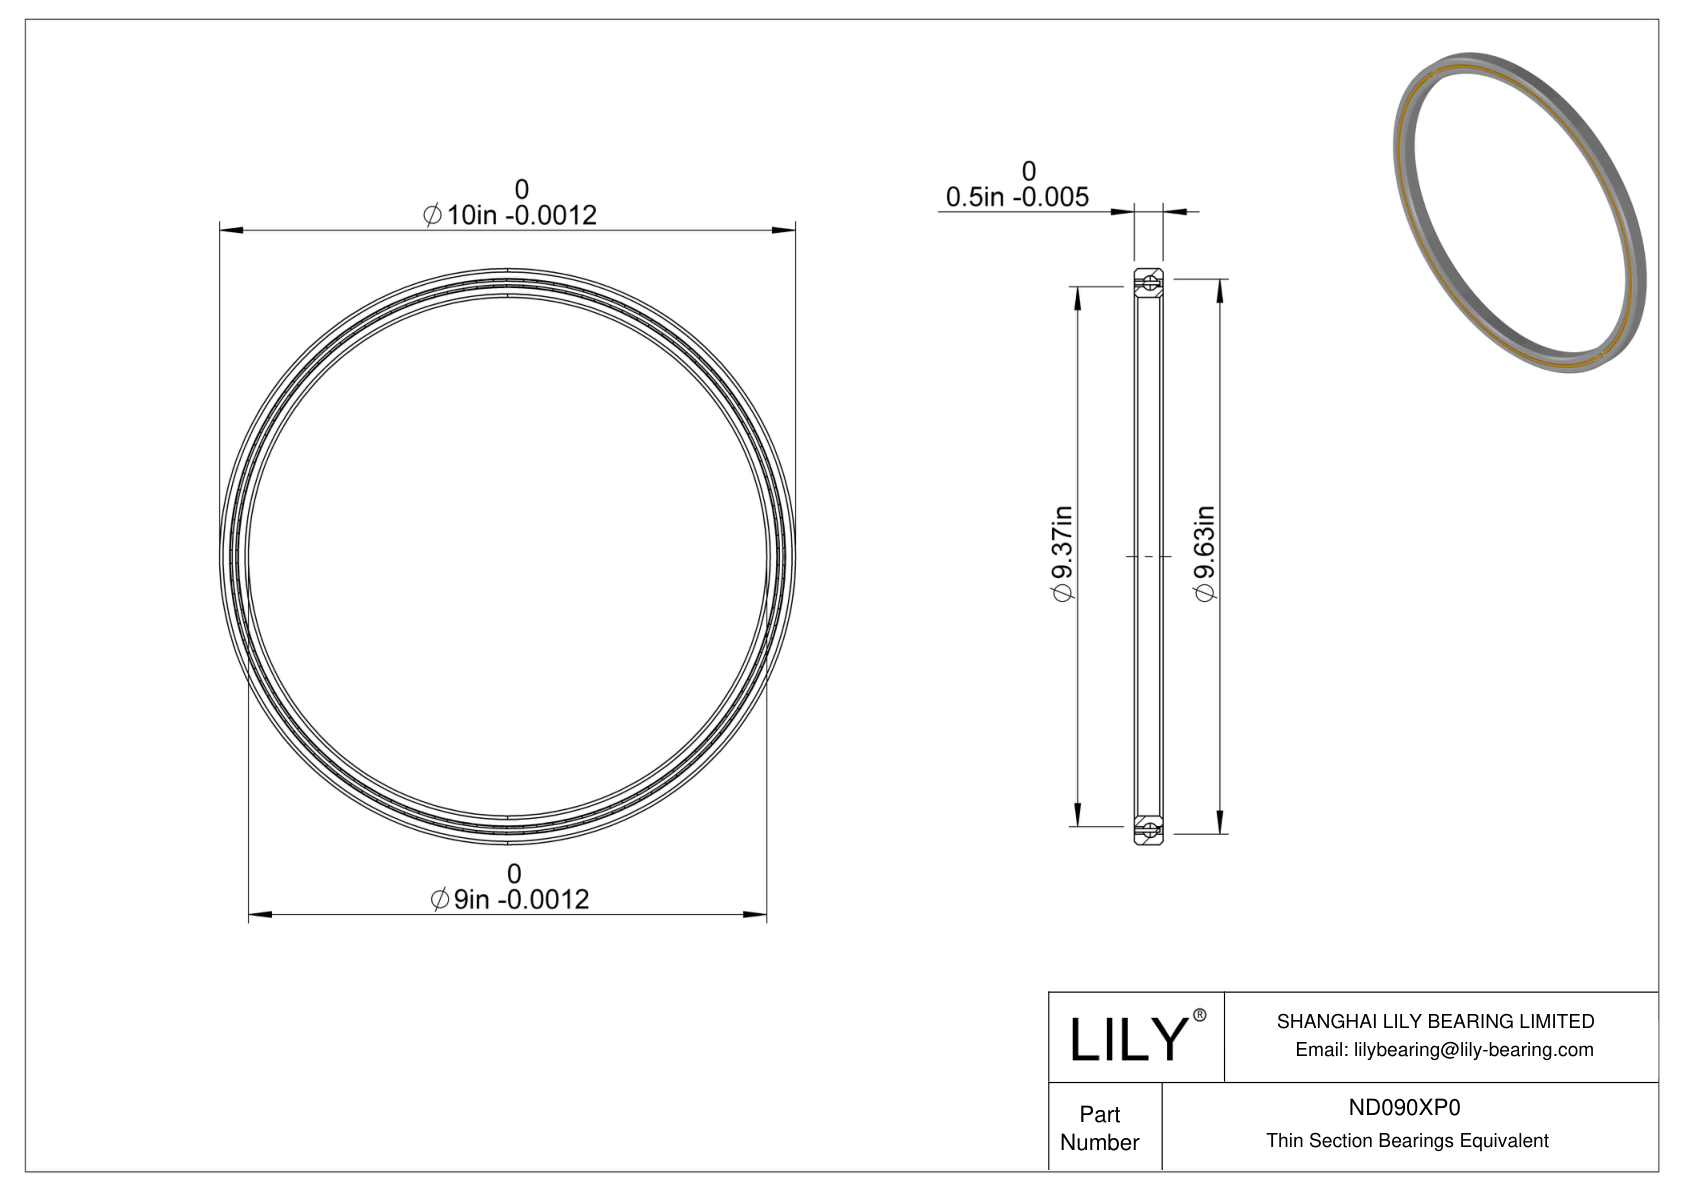 ND090XP0 Constant Section (CS) Bearings cad drawing